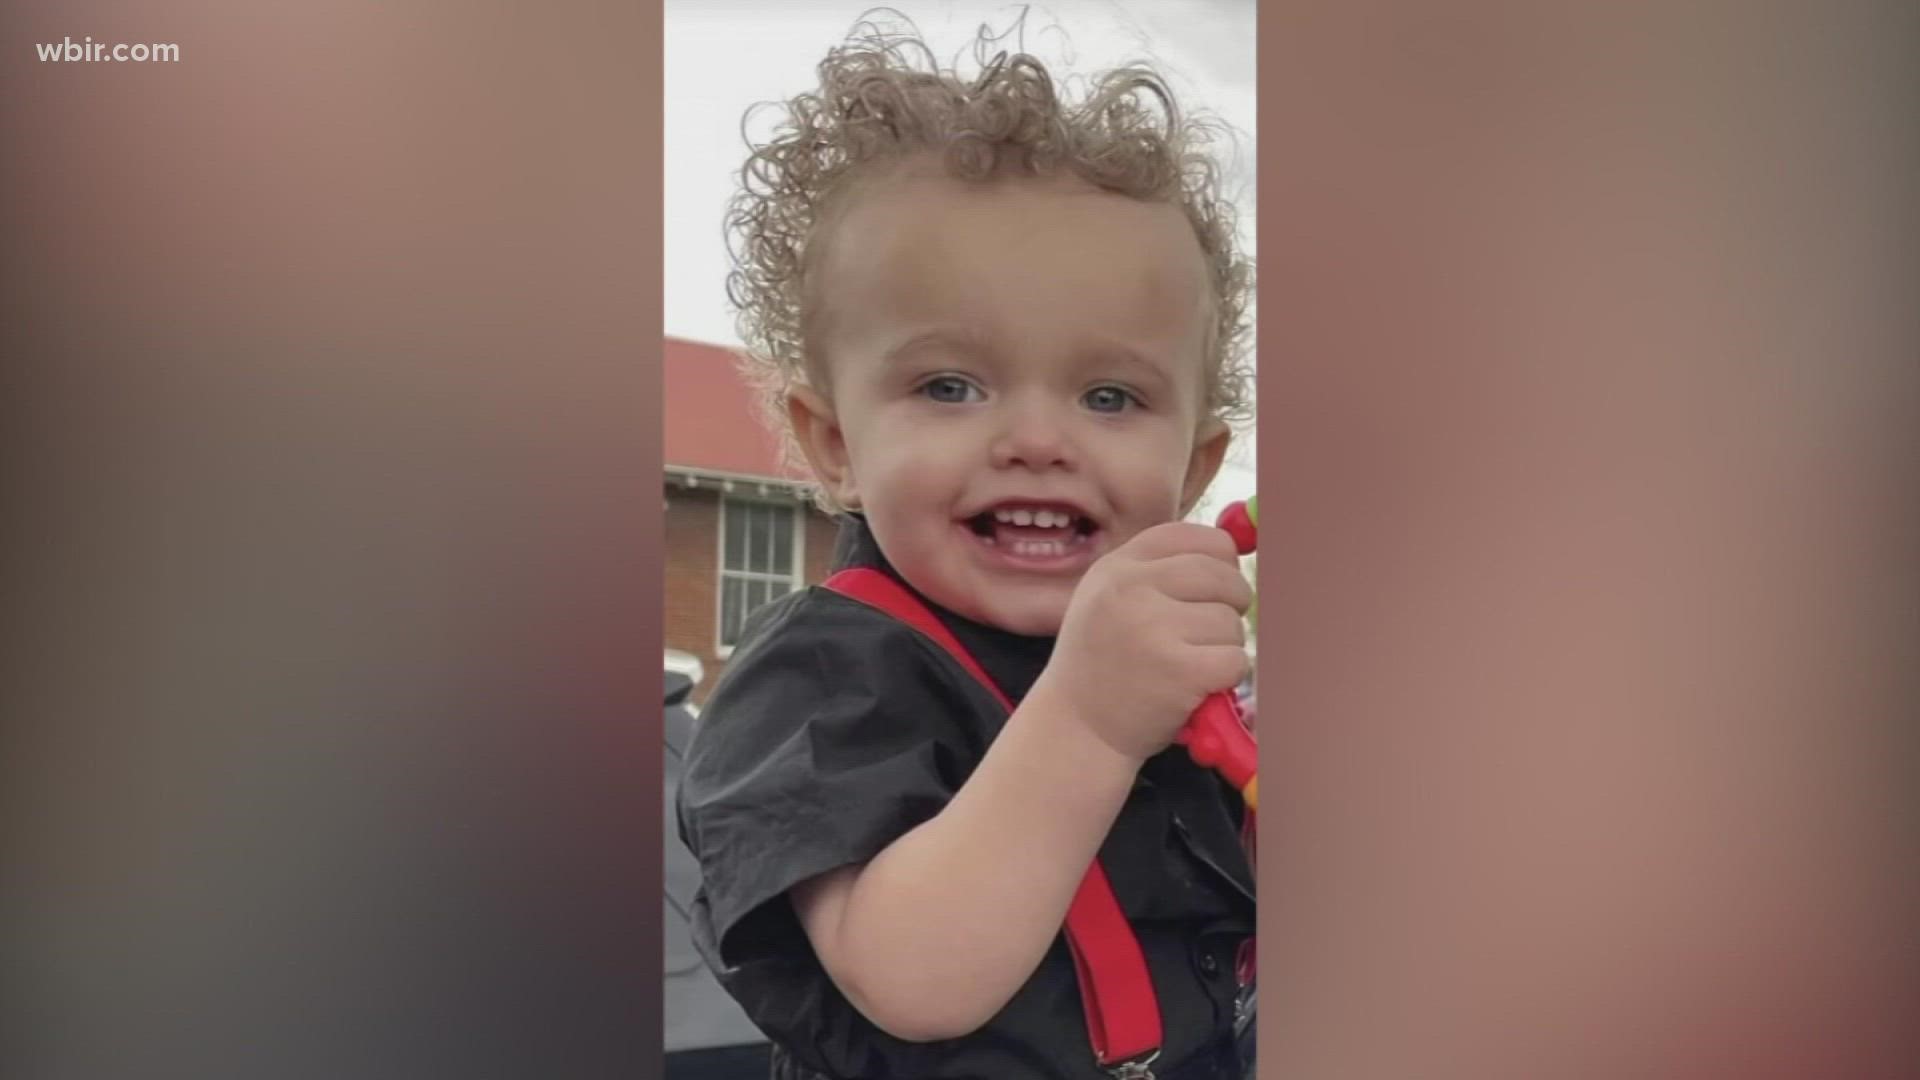 Chris Hixson's 2-year-old grandson was a victim of the floods.